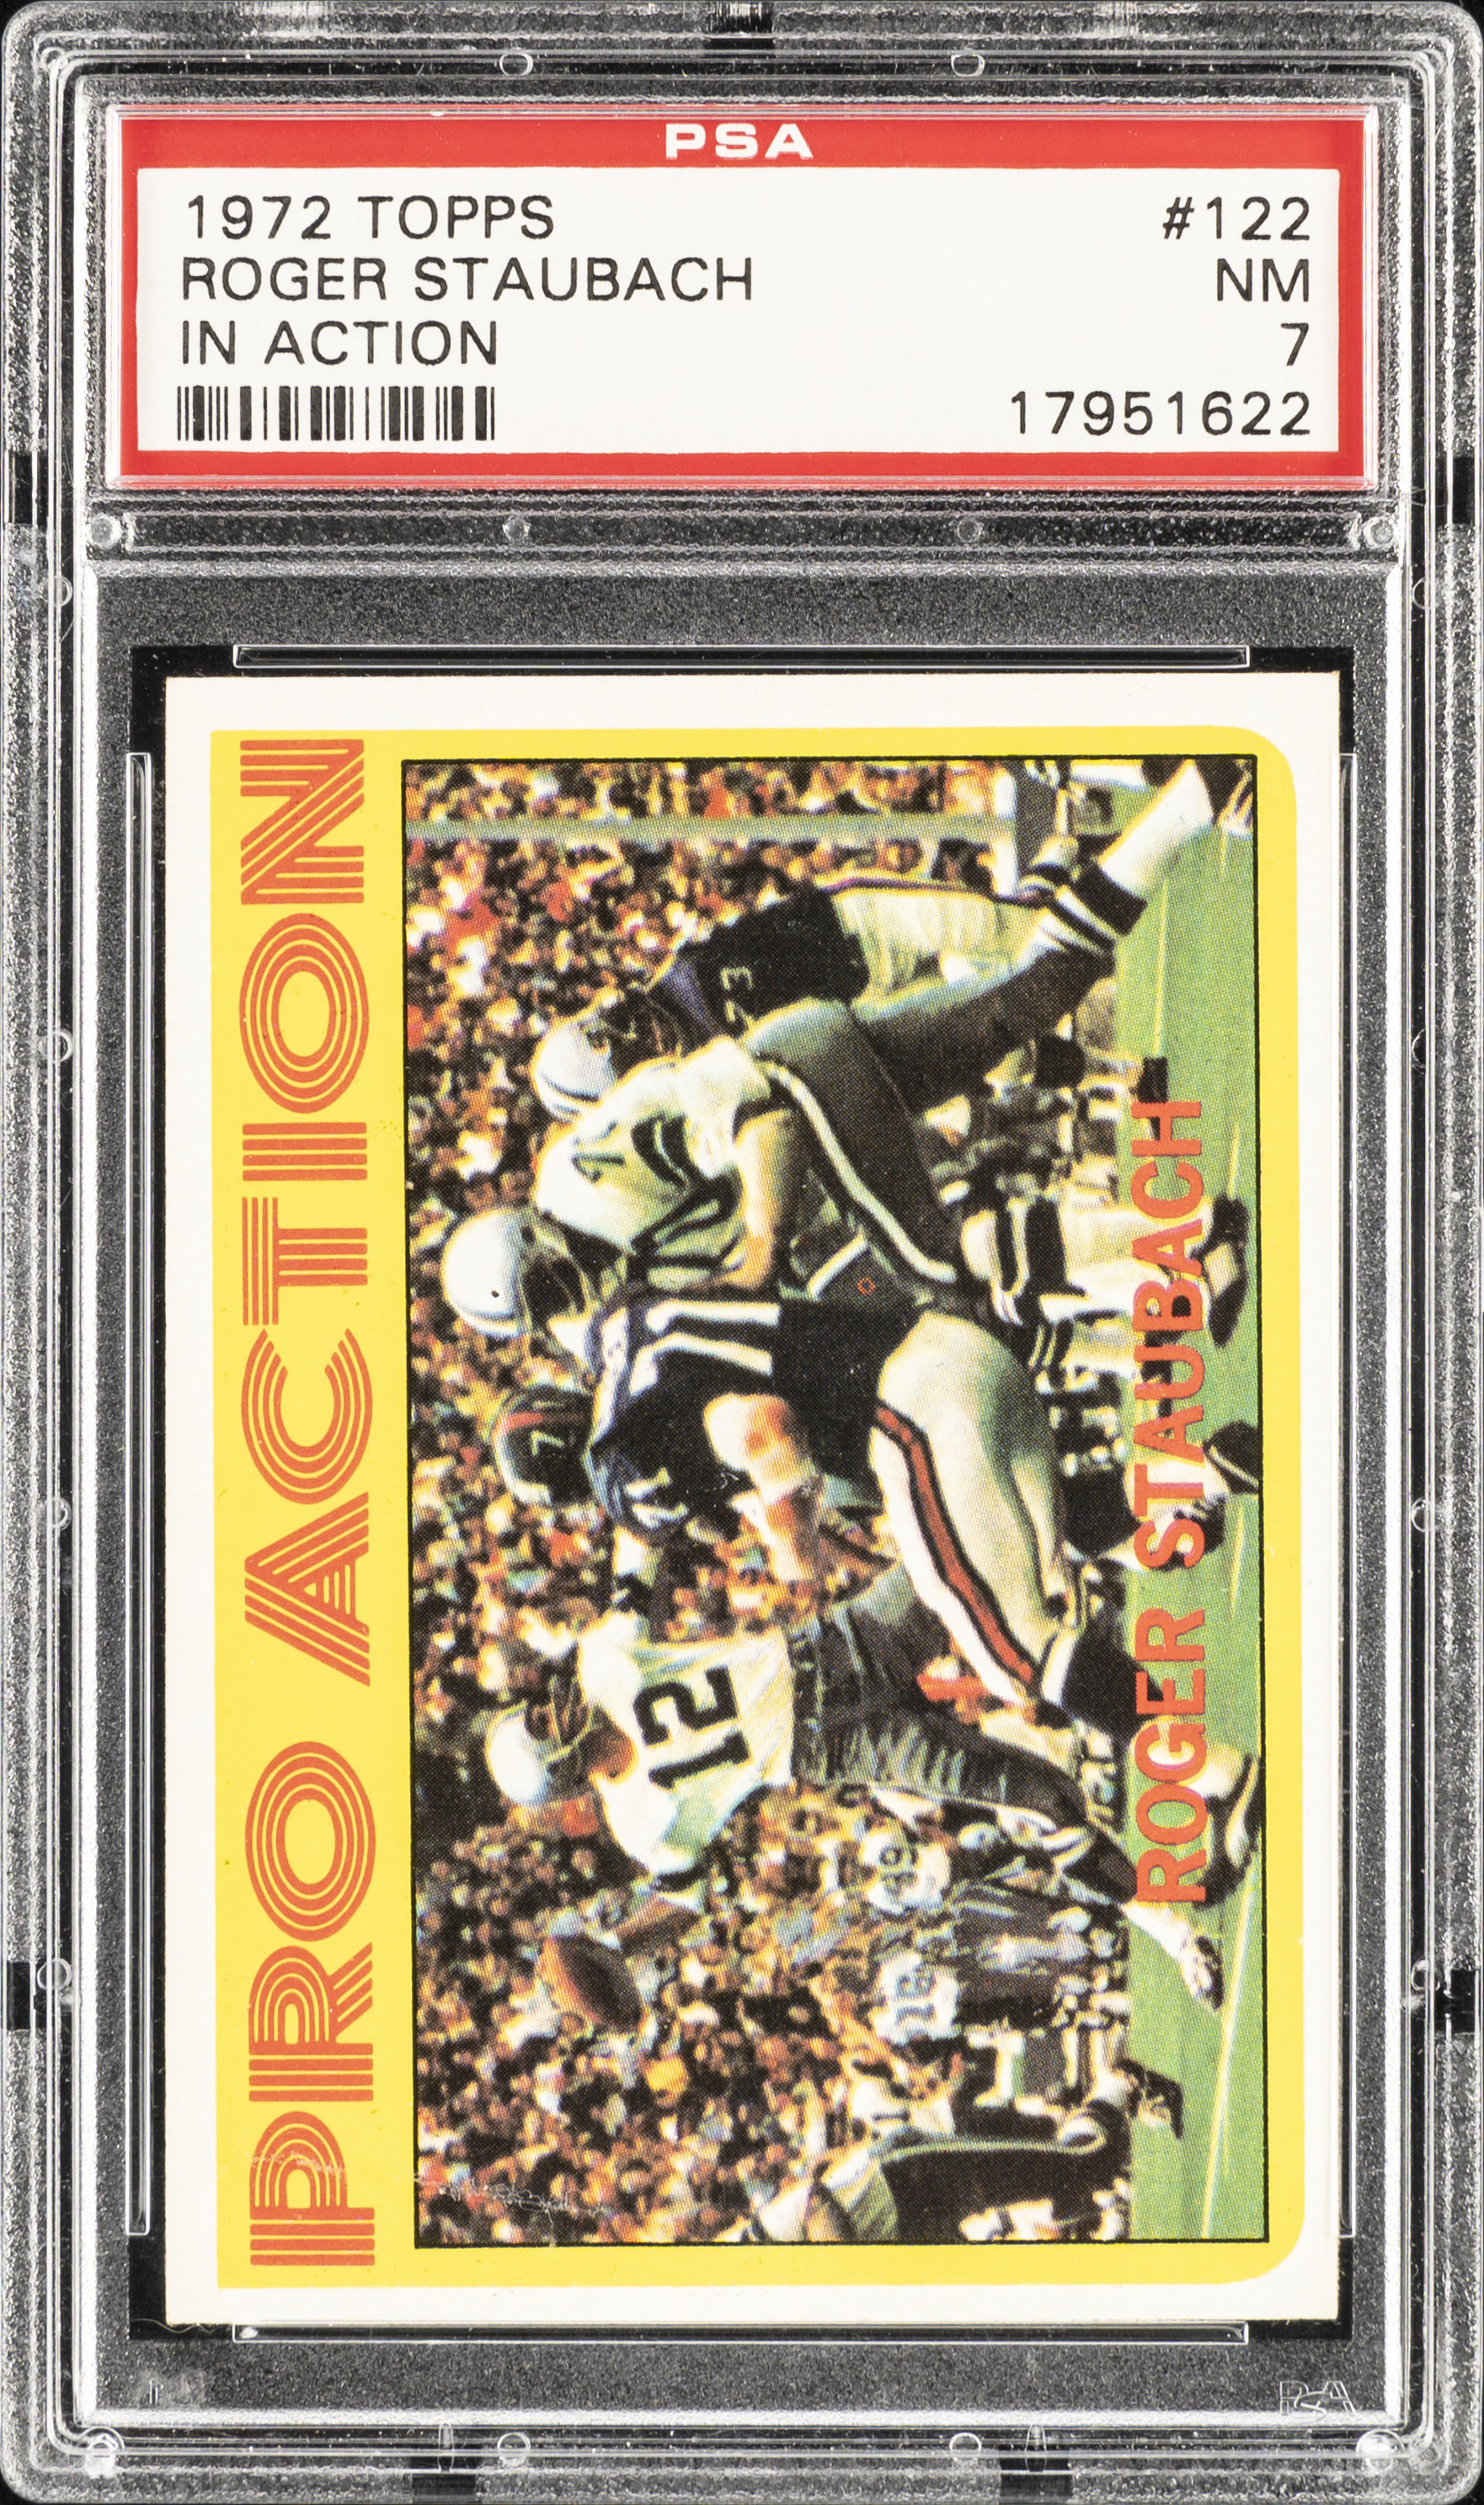 1972 Topps In Action 122 Roger Staubach – PSA NM 7